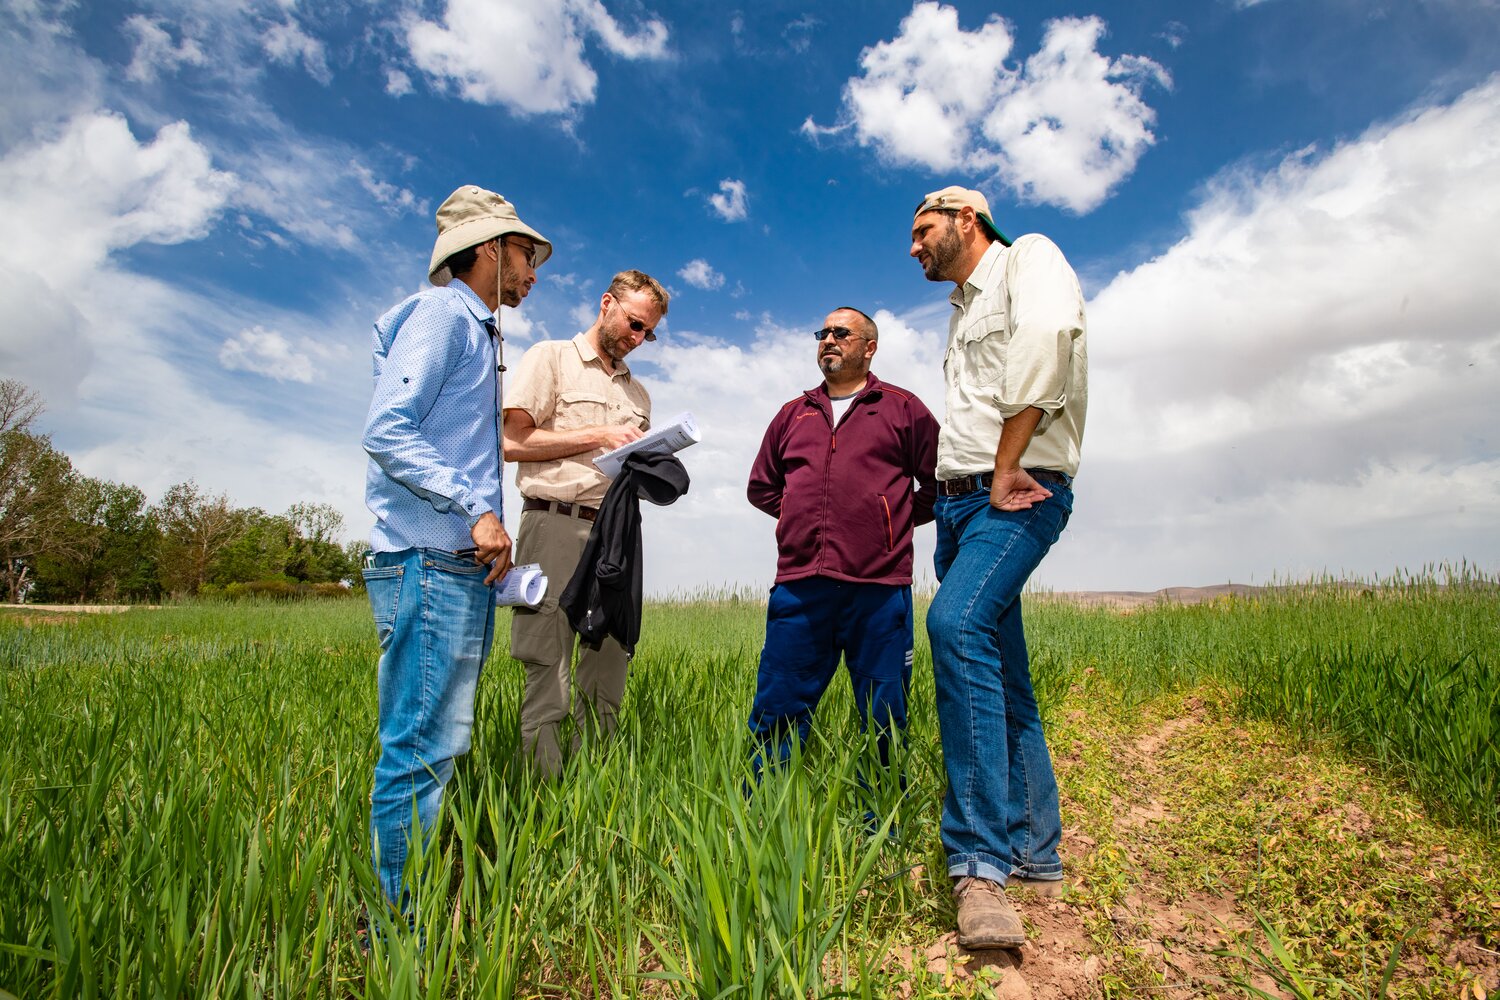 Visit to the farm of Haddou Aaziz (second from right) near Guigou, Morocco in the Atlas Mountains. Haddou is a participant of the DIIVA project. Photo: Michael Major/Crop Trust